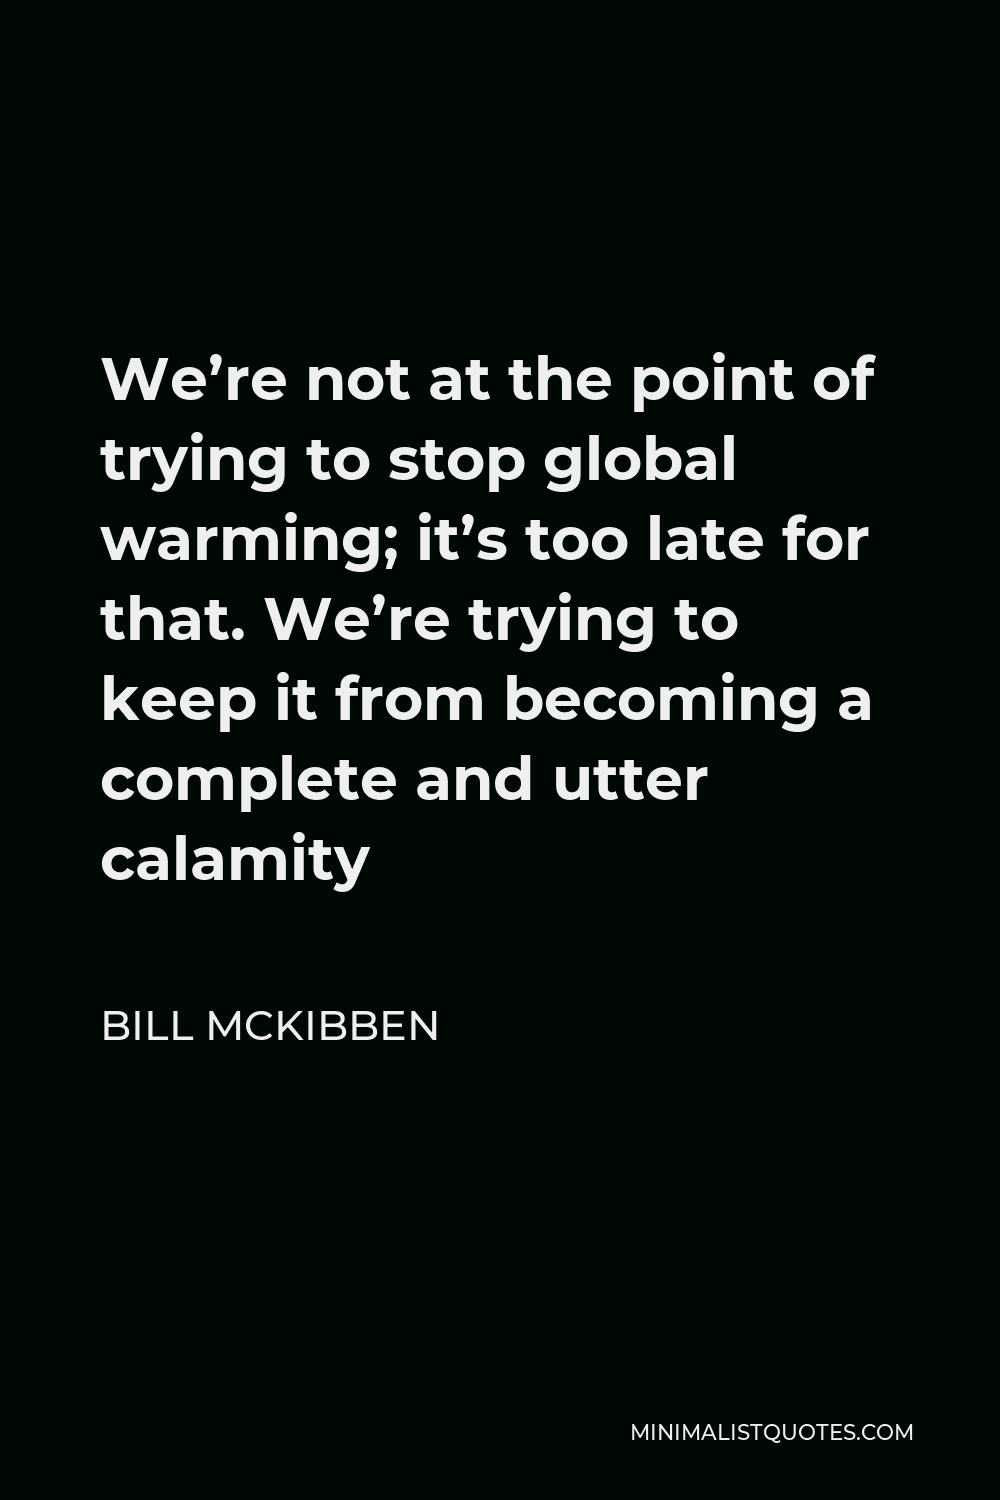 Bill McKibben Quote - We’re not at the point of trying to stop global warming; it’s too late for that. We’re trying to keep it from becoming a complete and utter calamity